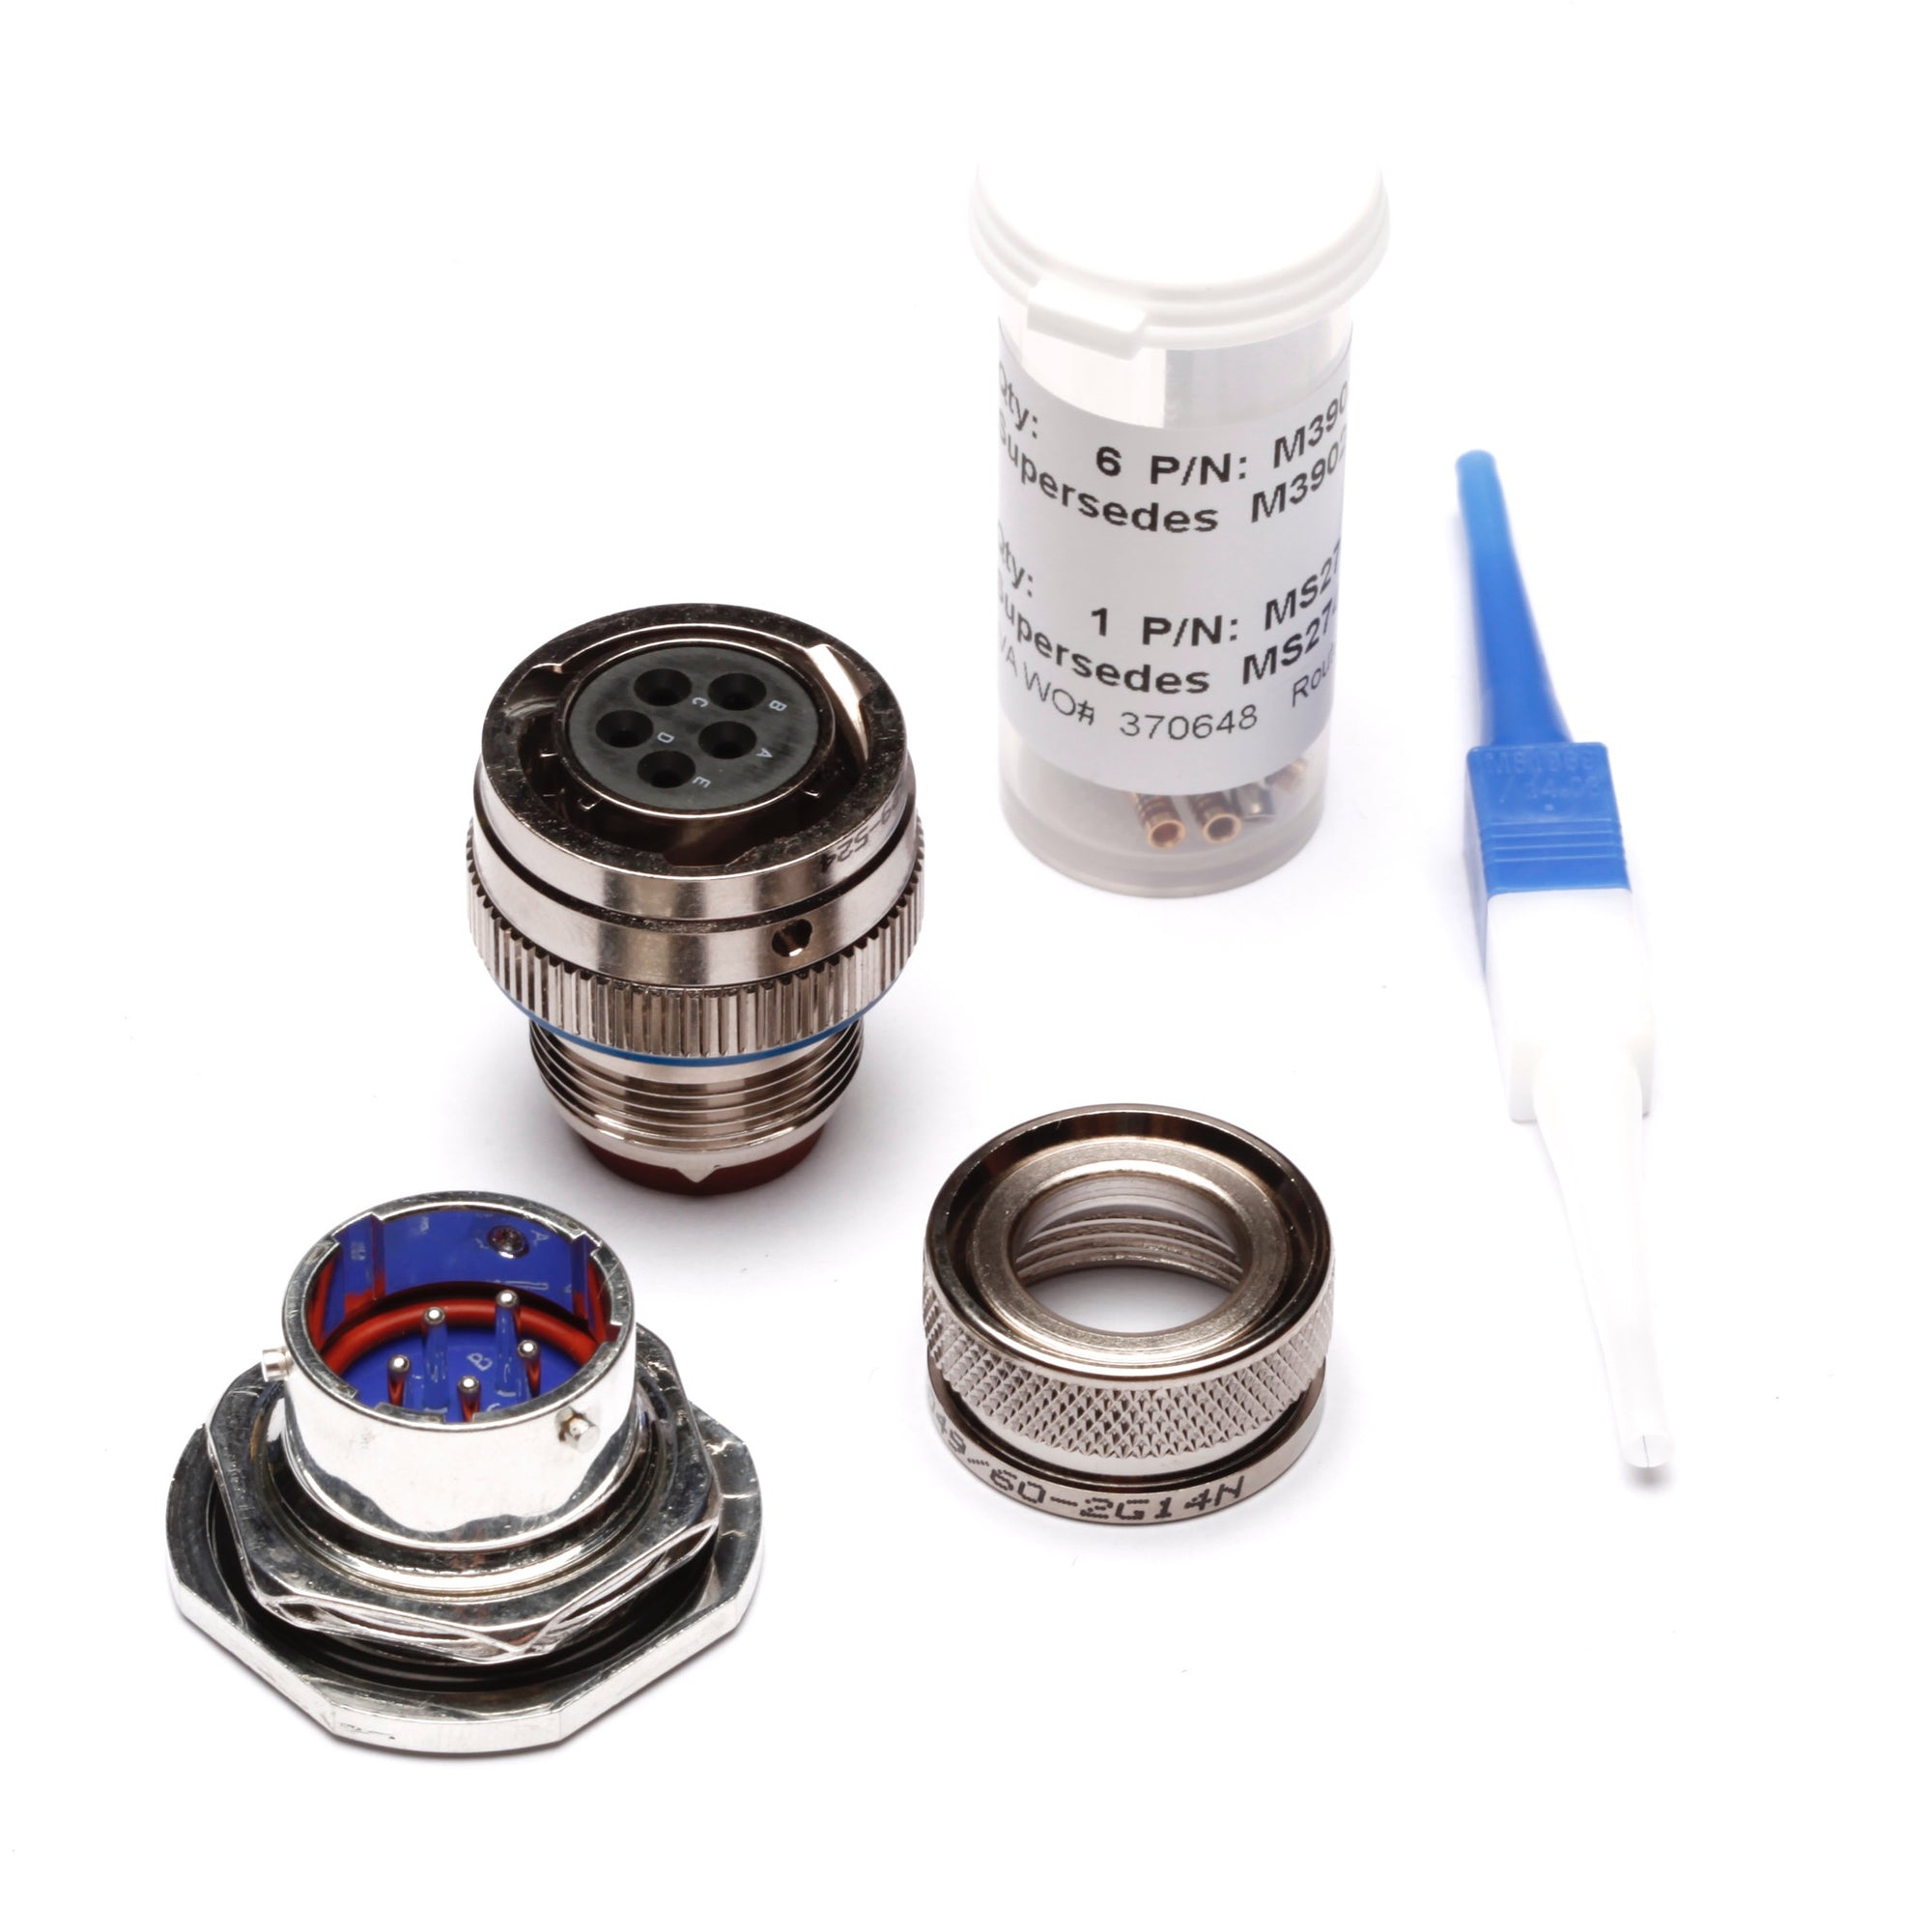 Connectors - MIL-Spec Hermetically Sealed Connector Kit